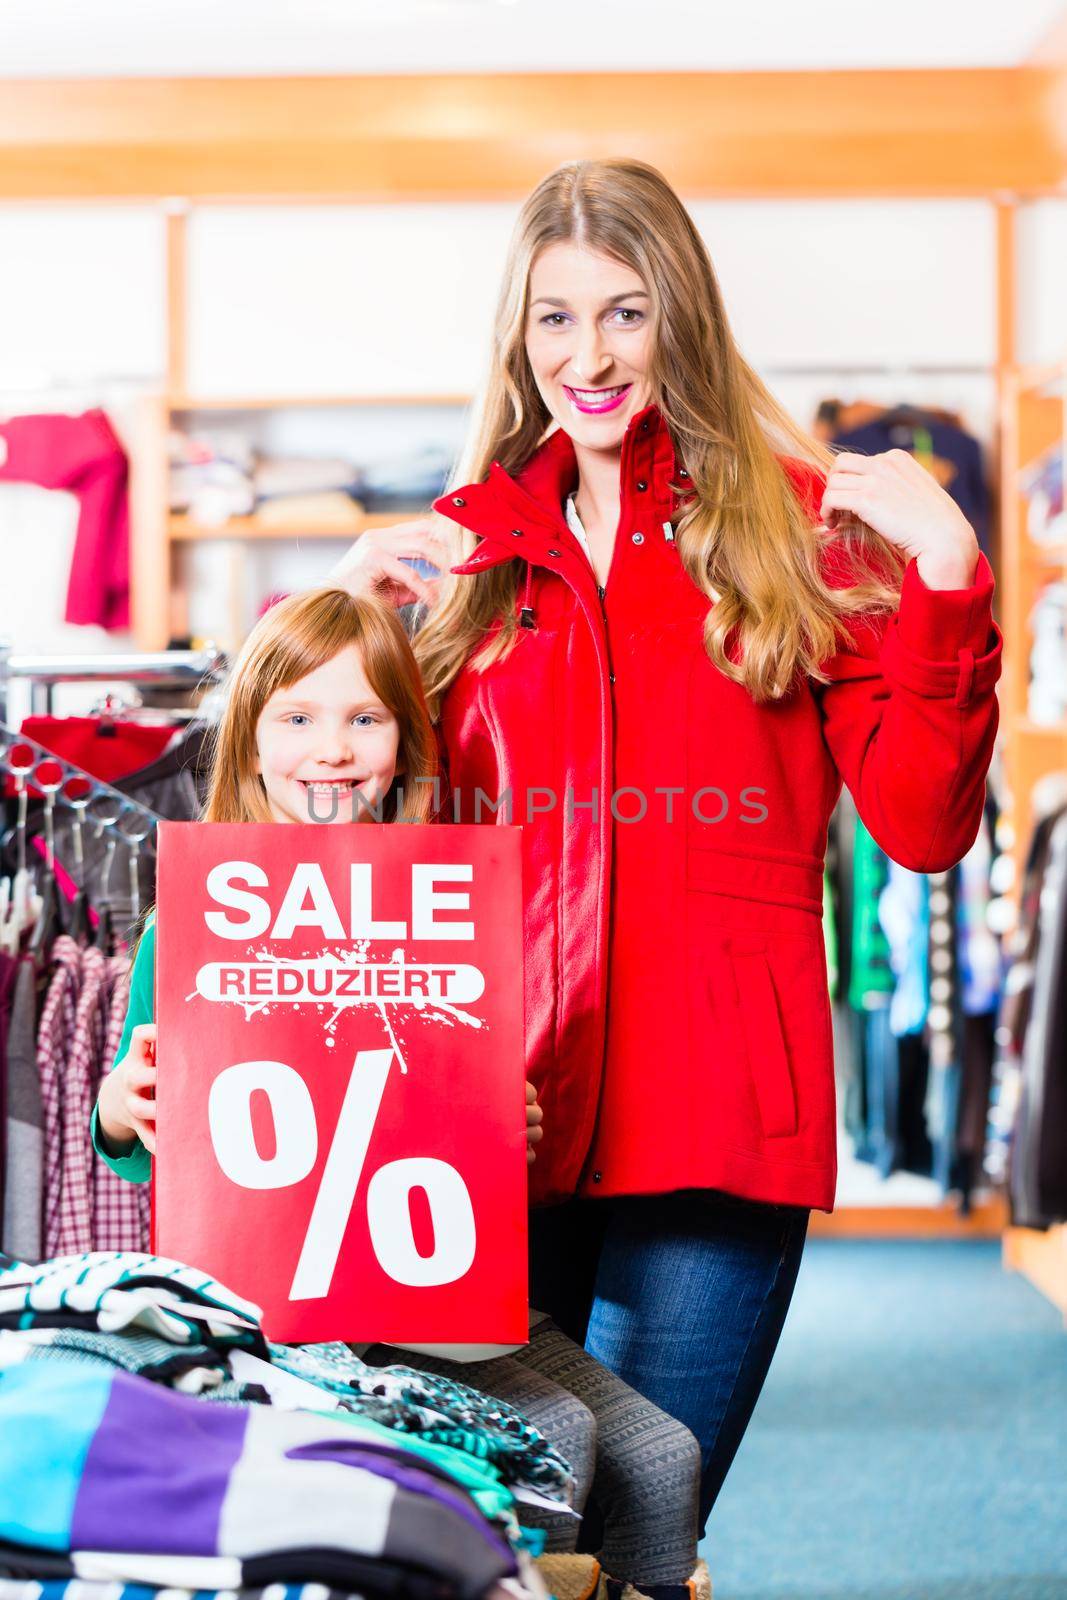 Smiling little girl and woman promoting sale offer by Kzenon